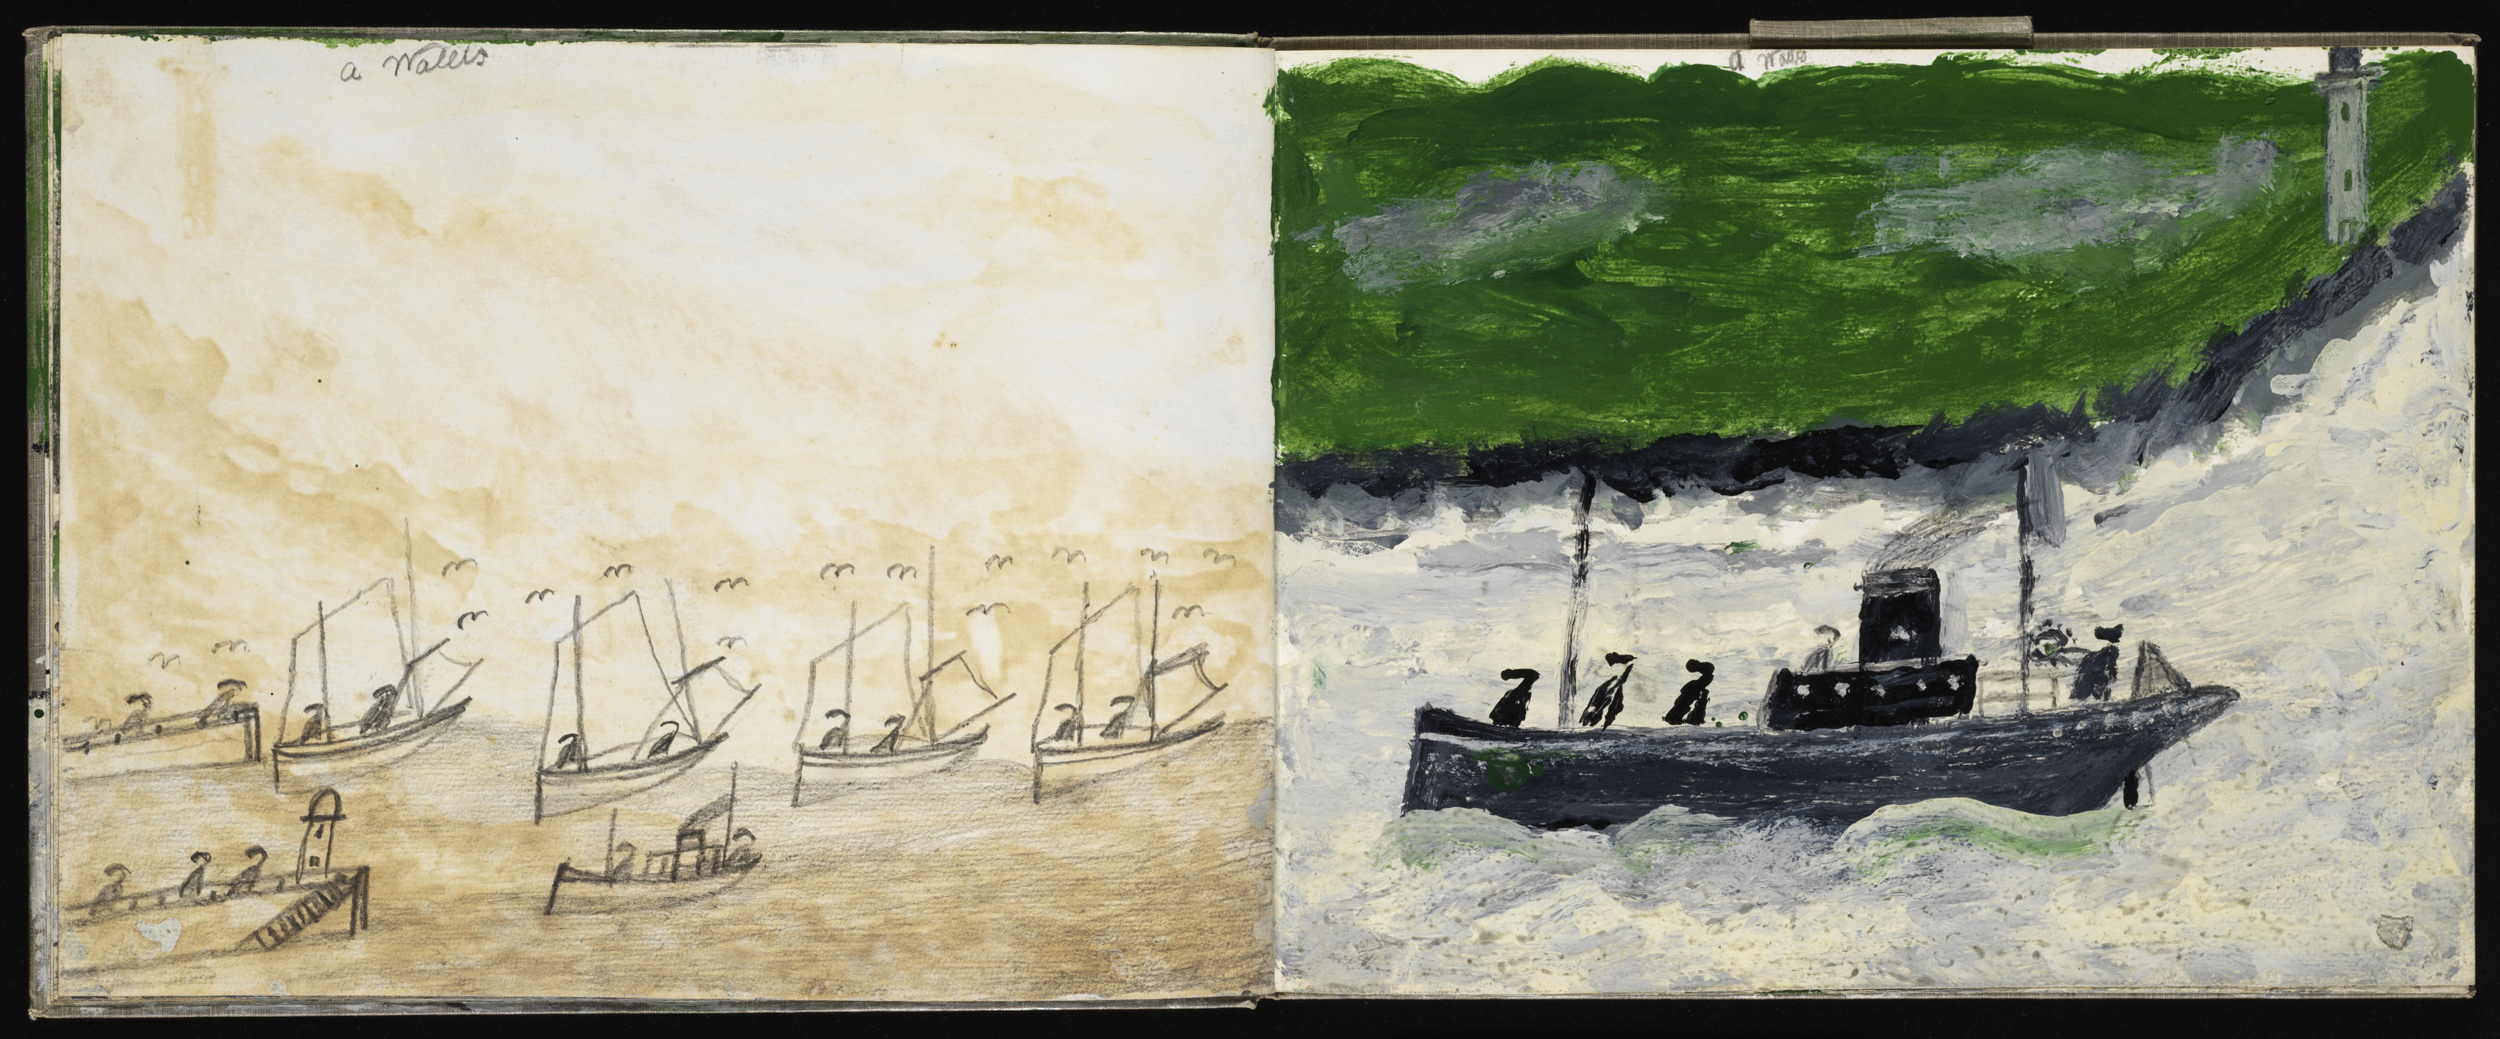 Scans of a sketchbook showing drawings of boats on the sea